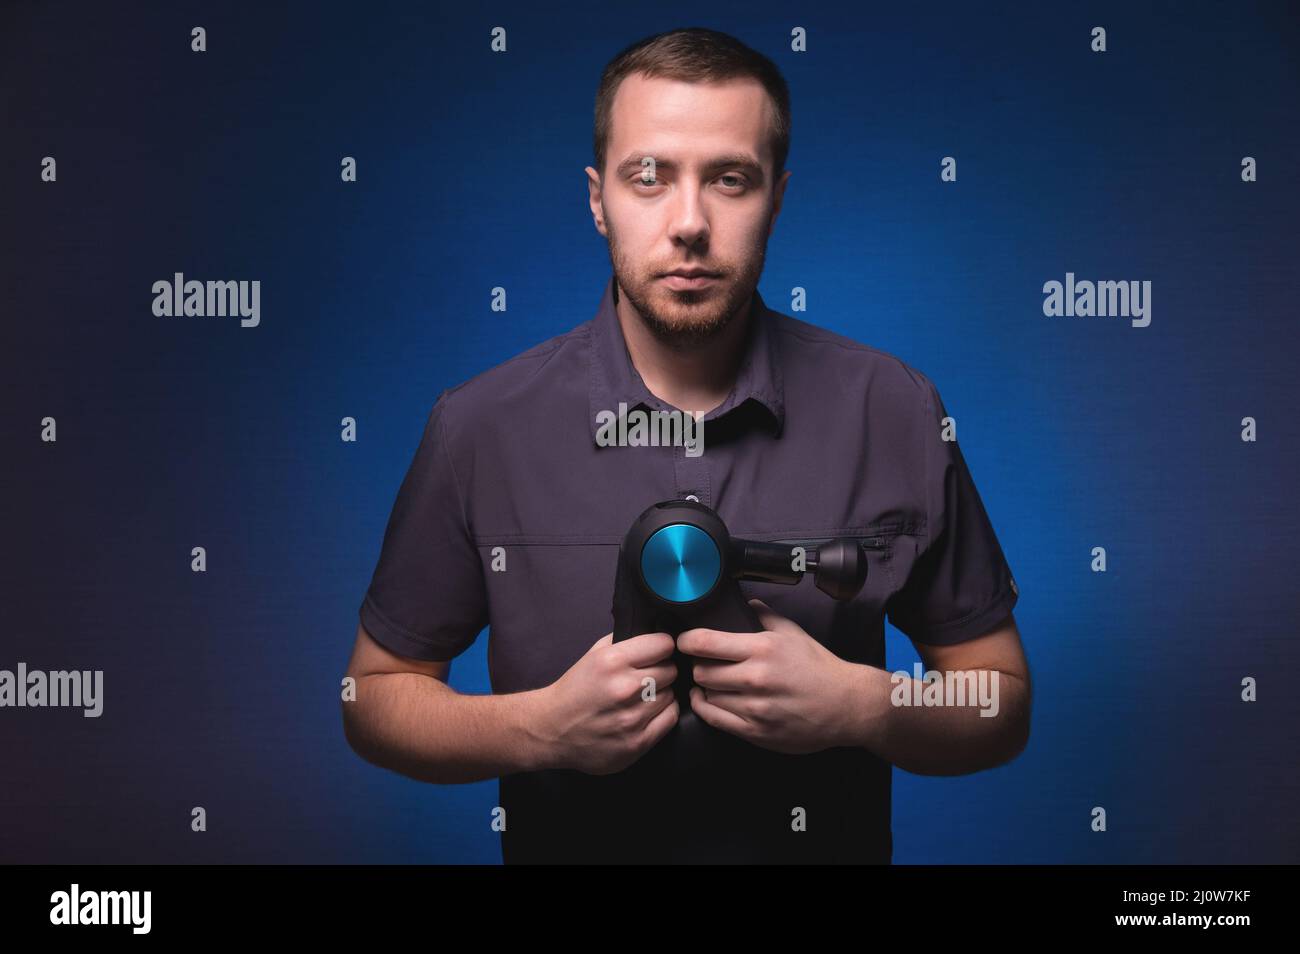 Portrait of a confident professional masseur with a percussion massager in his hands. Low key, blue background. Shock wave massa Stock Photo